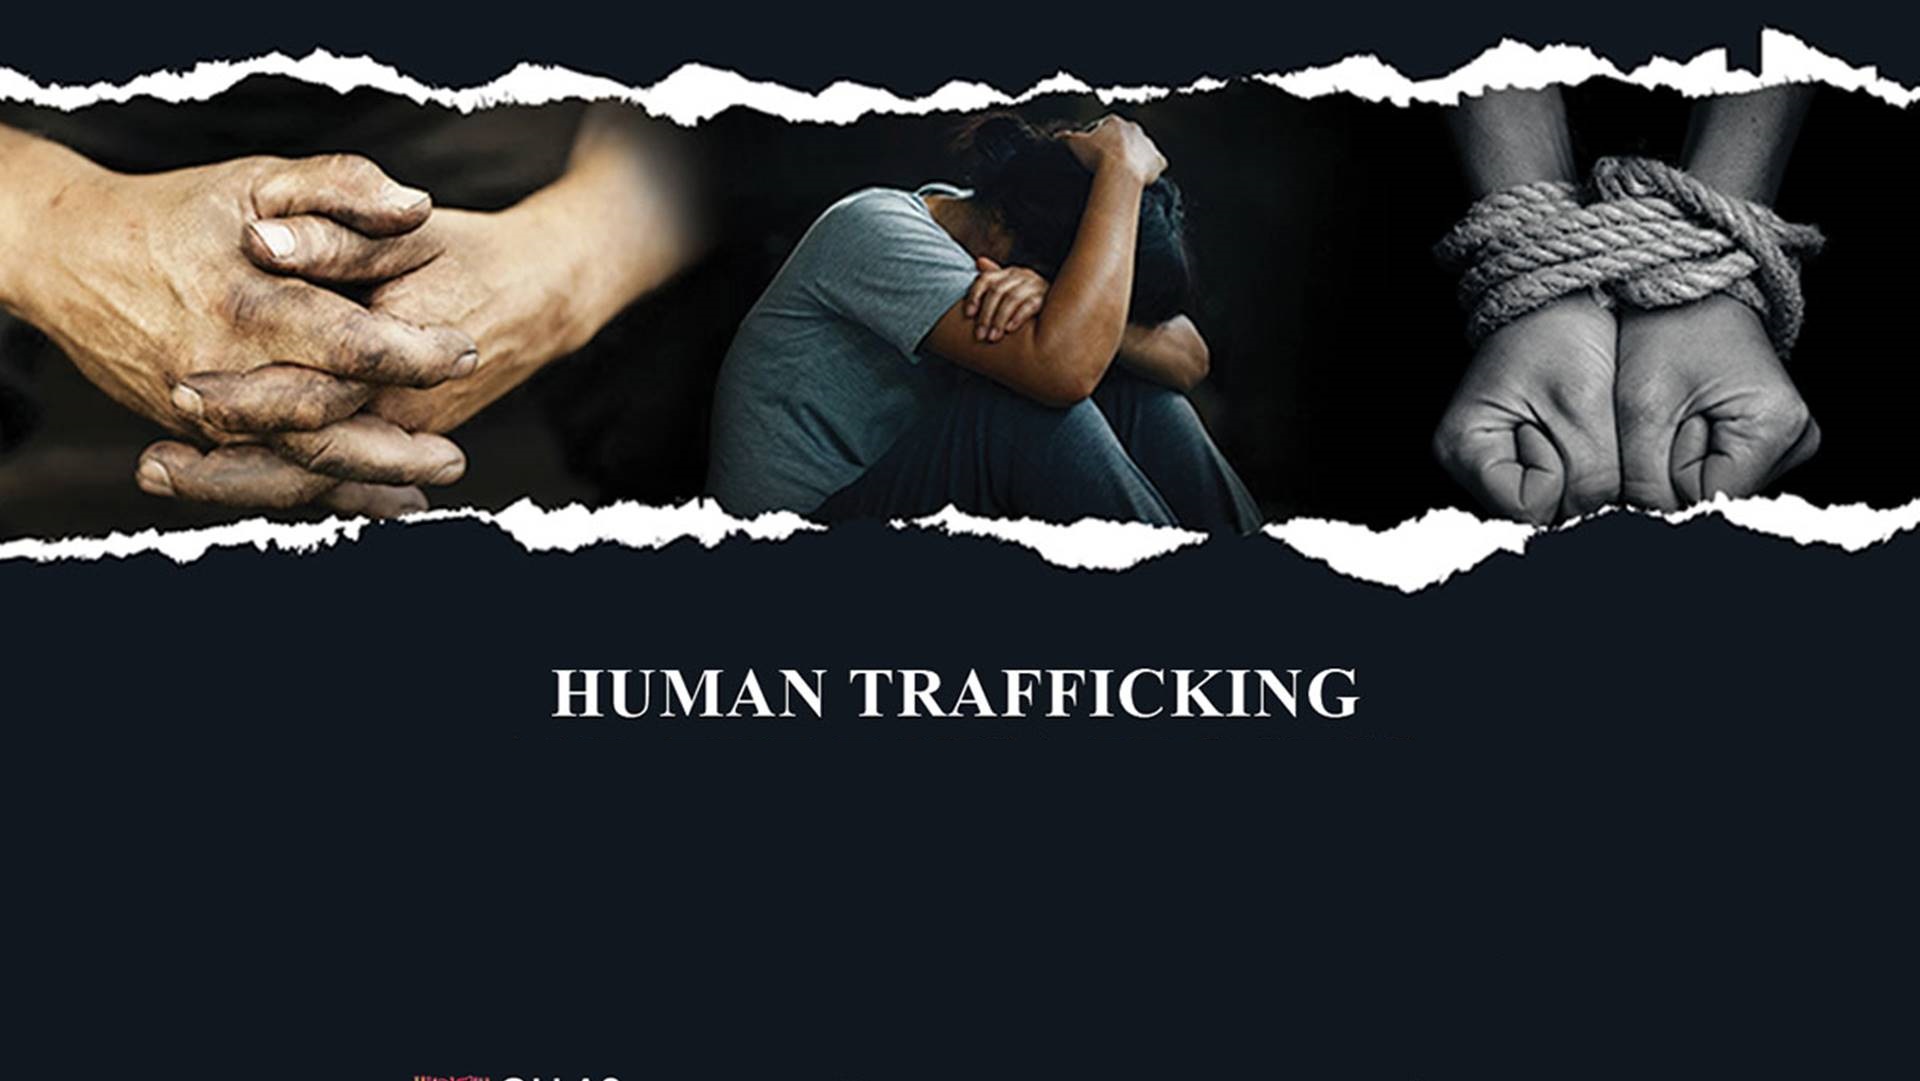 Number of child human trafficking victims doubles in 2021